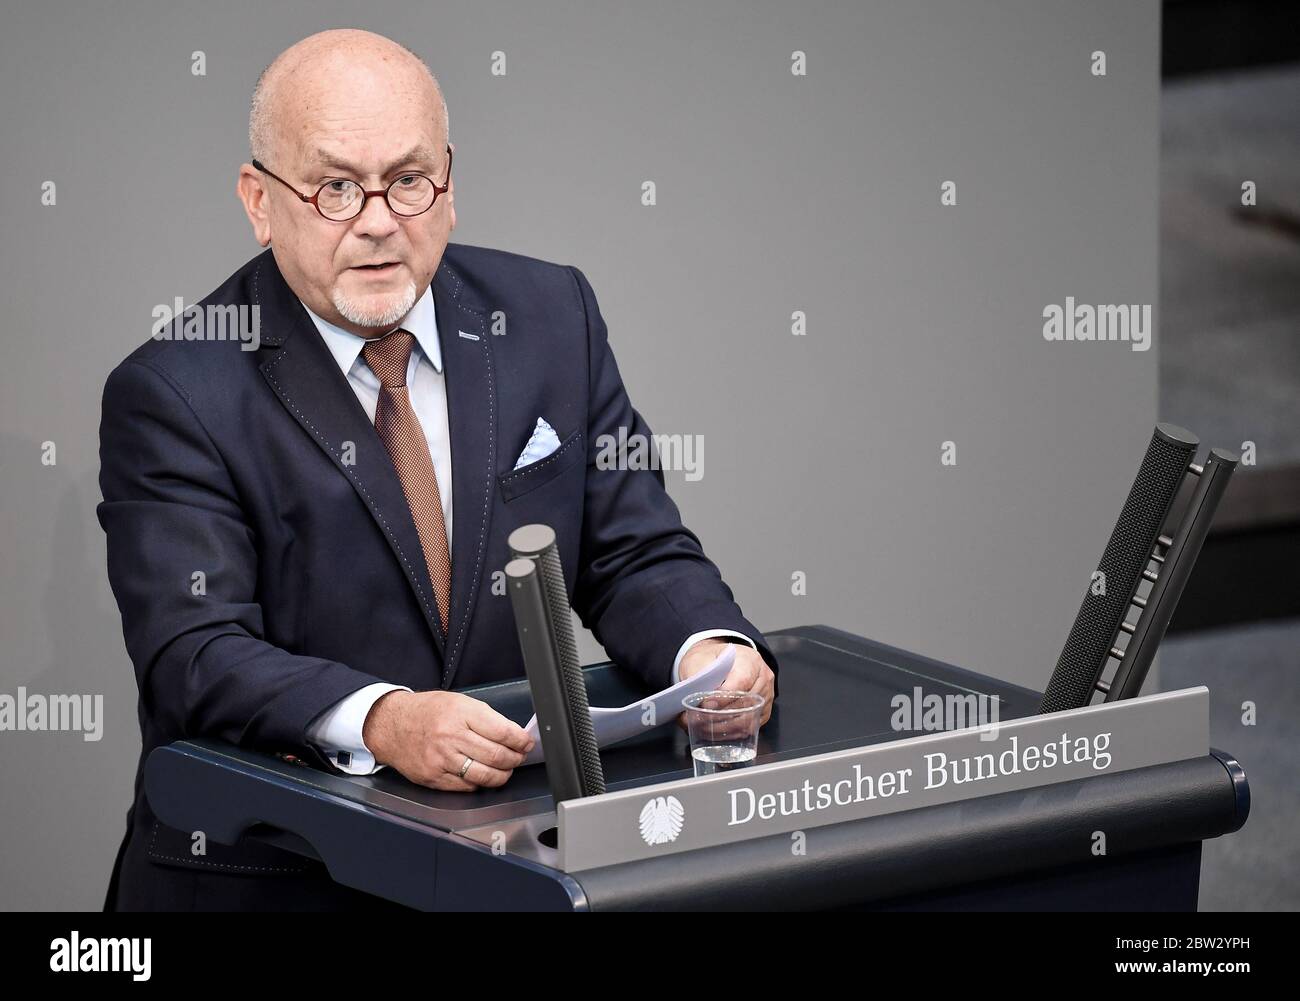 Berlin, Germany. 29th May, 2020. Manfred Grund (CDU), Parliamentary Secretary of the CDU/CSU parliamentary group, speaks at the 164th session of the Bundestag. The security law for Hong Kong is debated. Credit: Britta Pedersen/dpa-Zentralbild/dpa/Alamy Live News Stock Photo